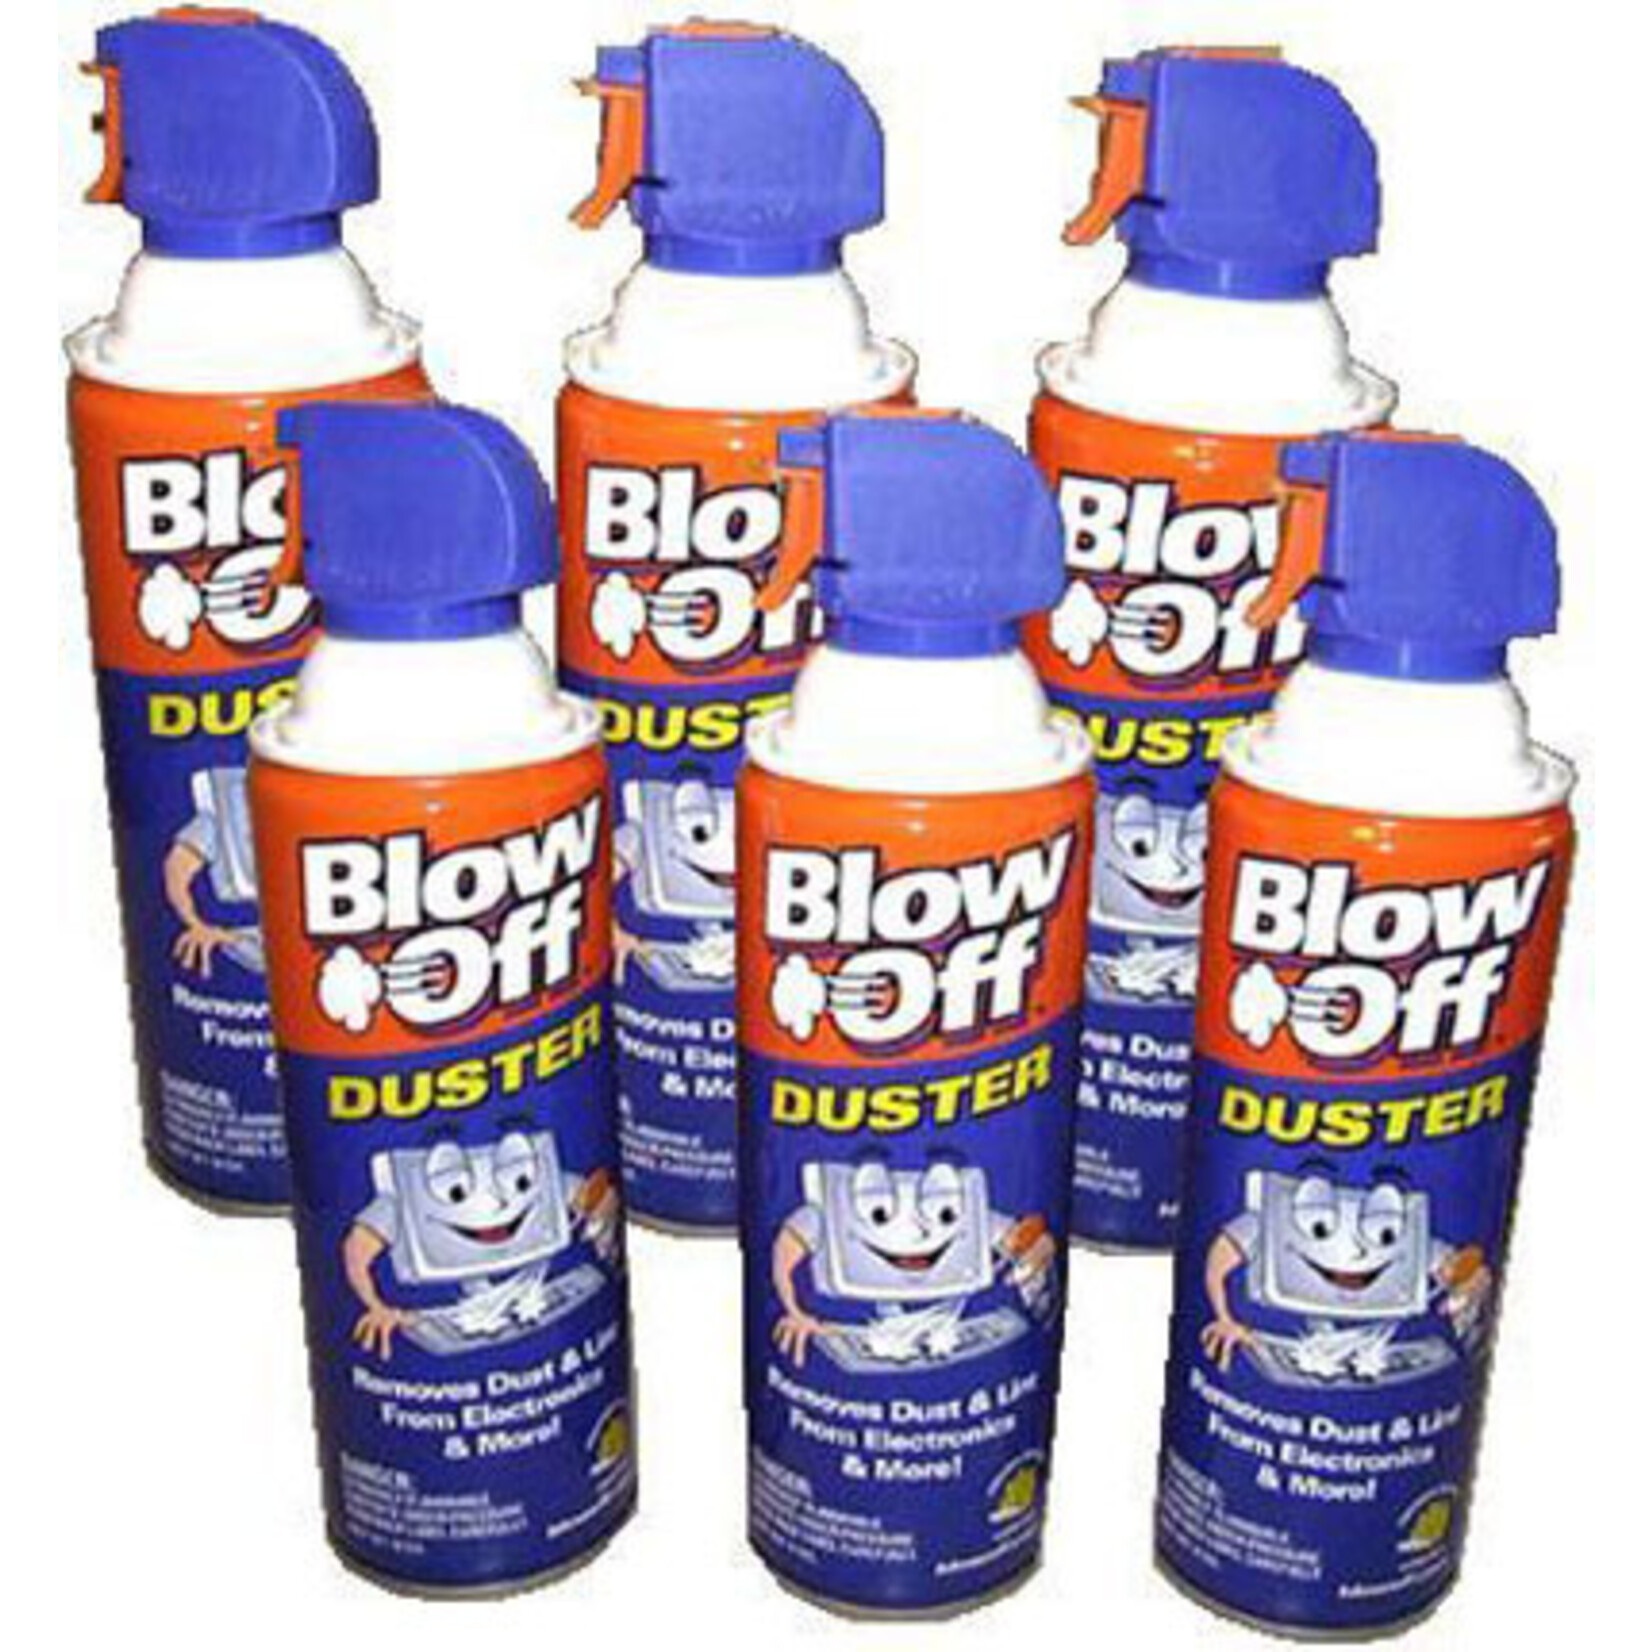 Blow Off Canned Air/Duster 8 oz